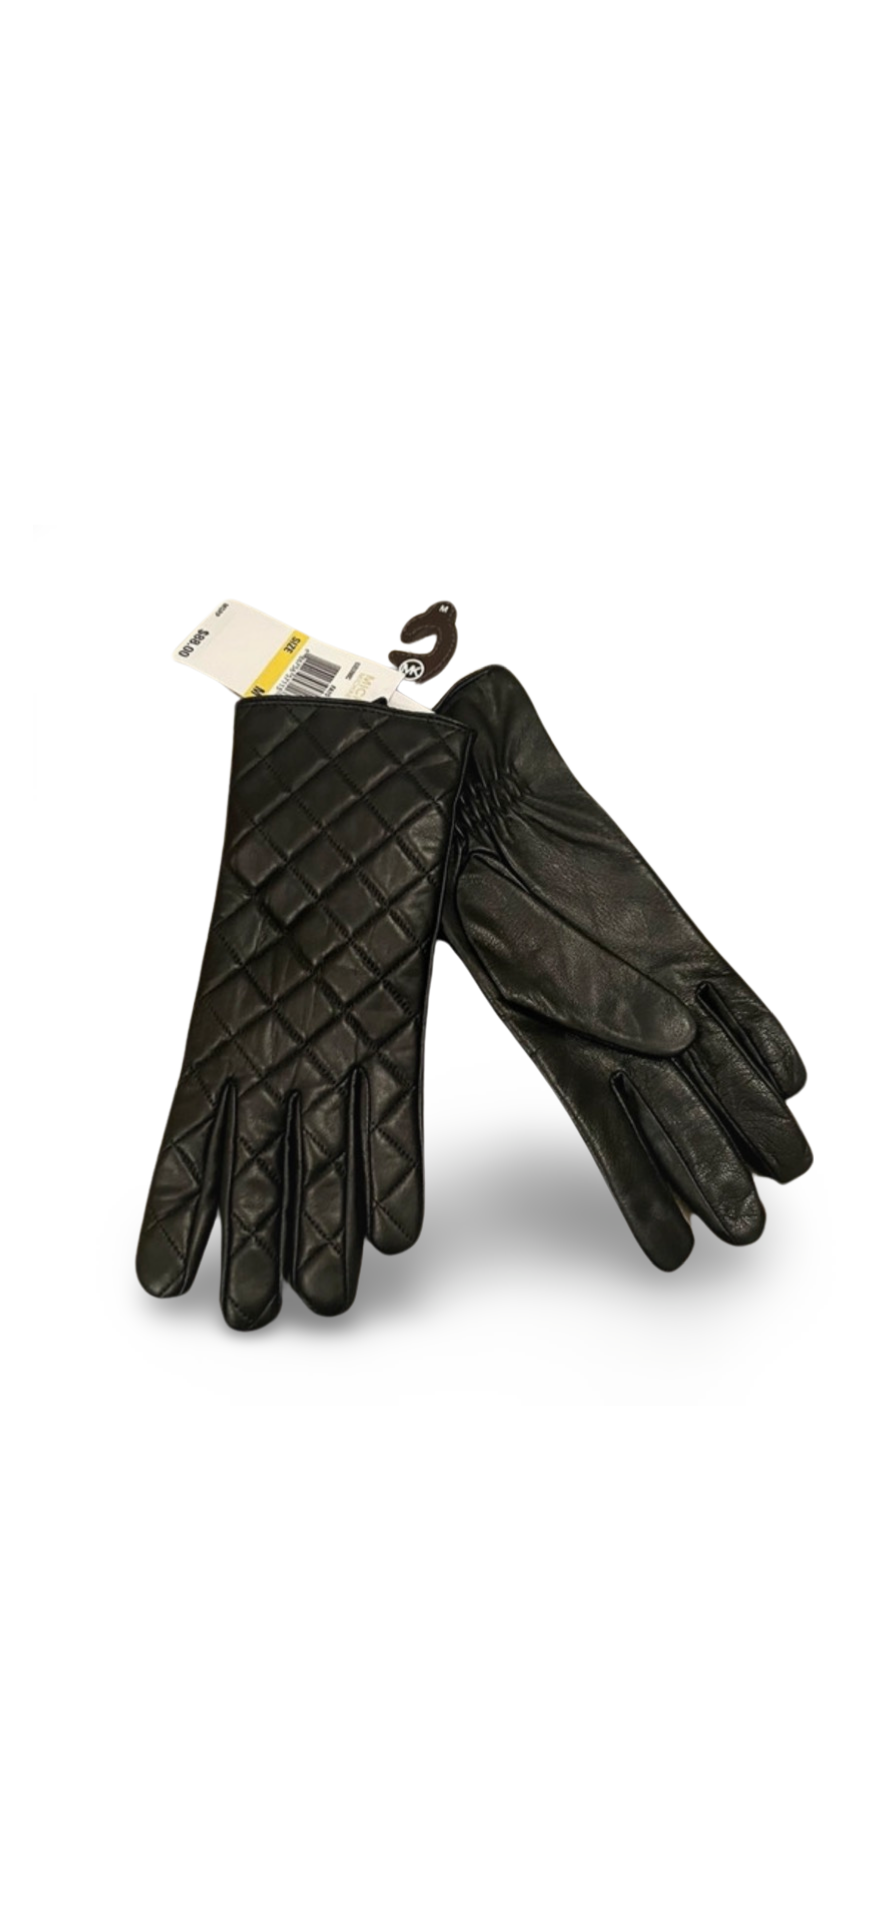 Michael Kors Quilted Leather Tech Gloves Size M